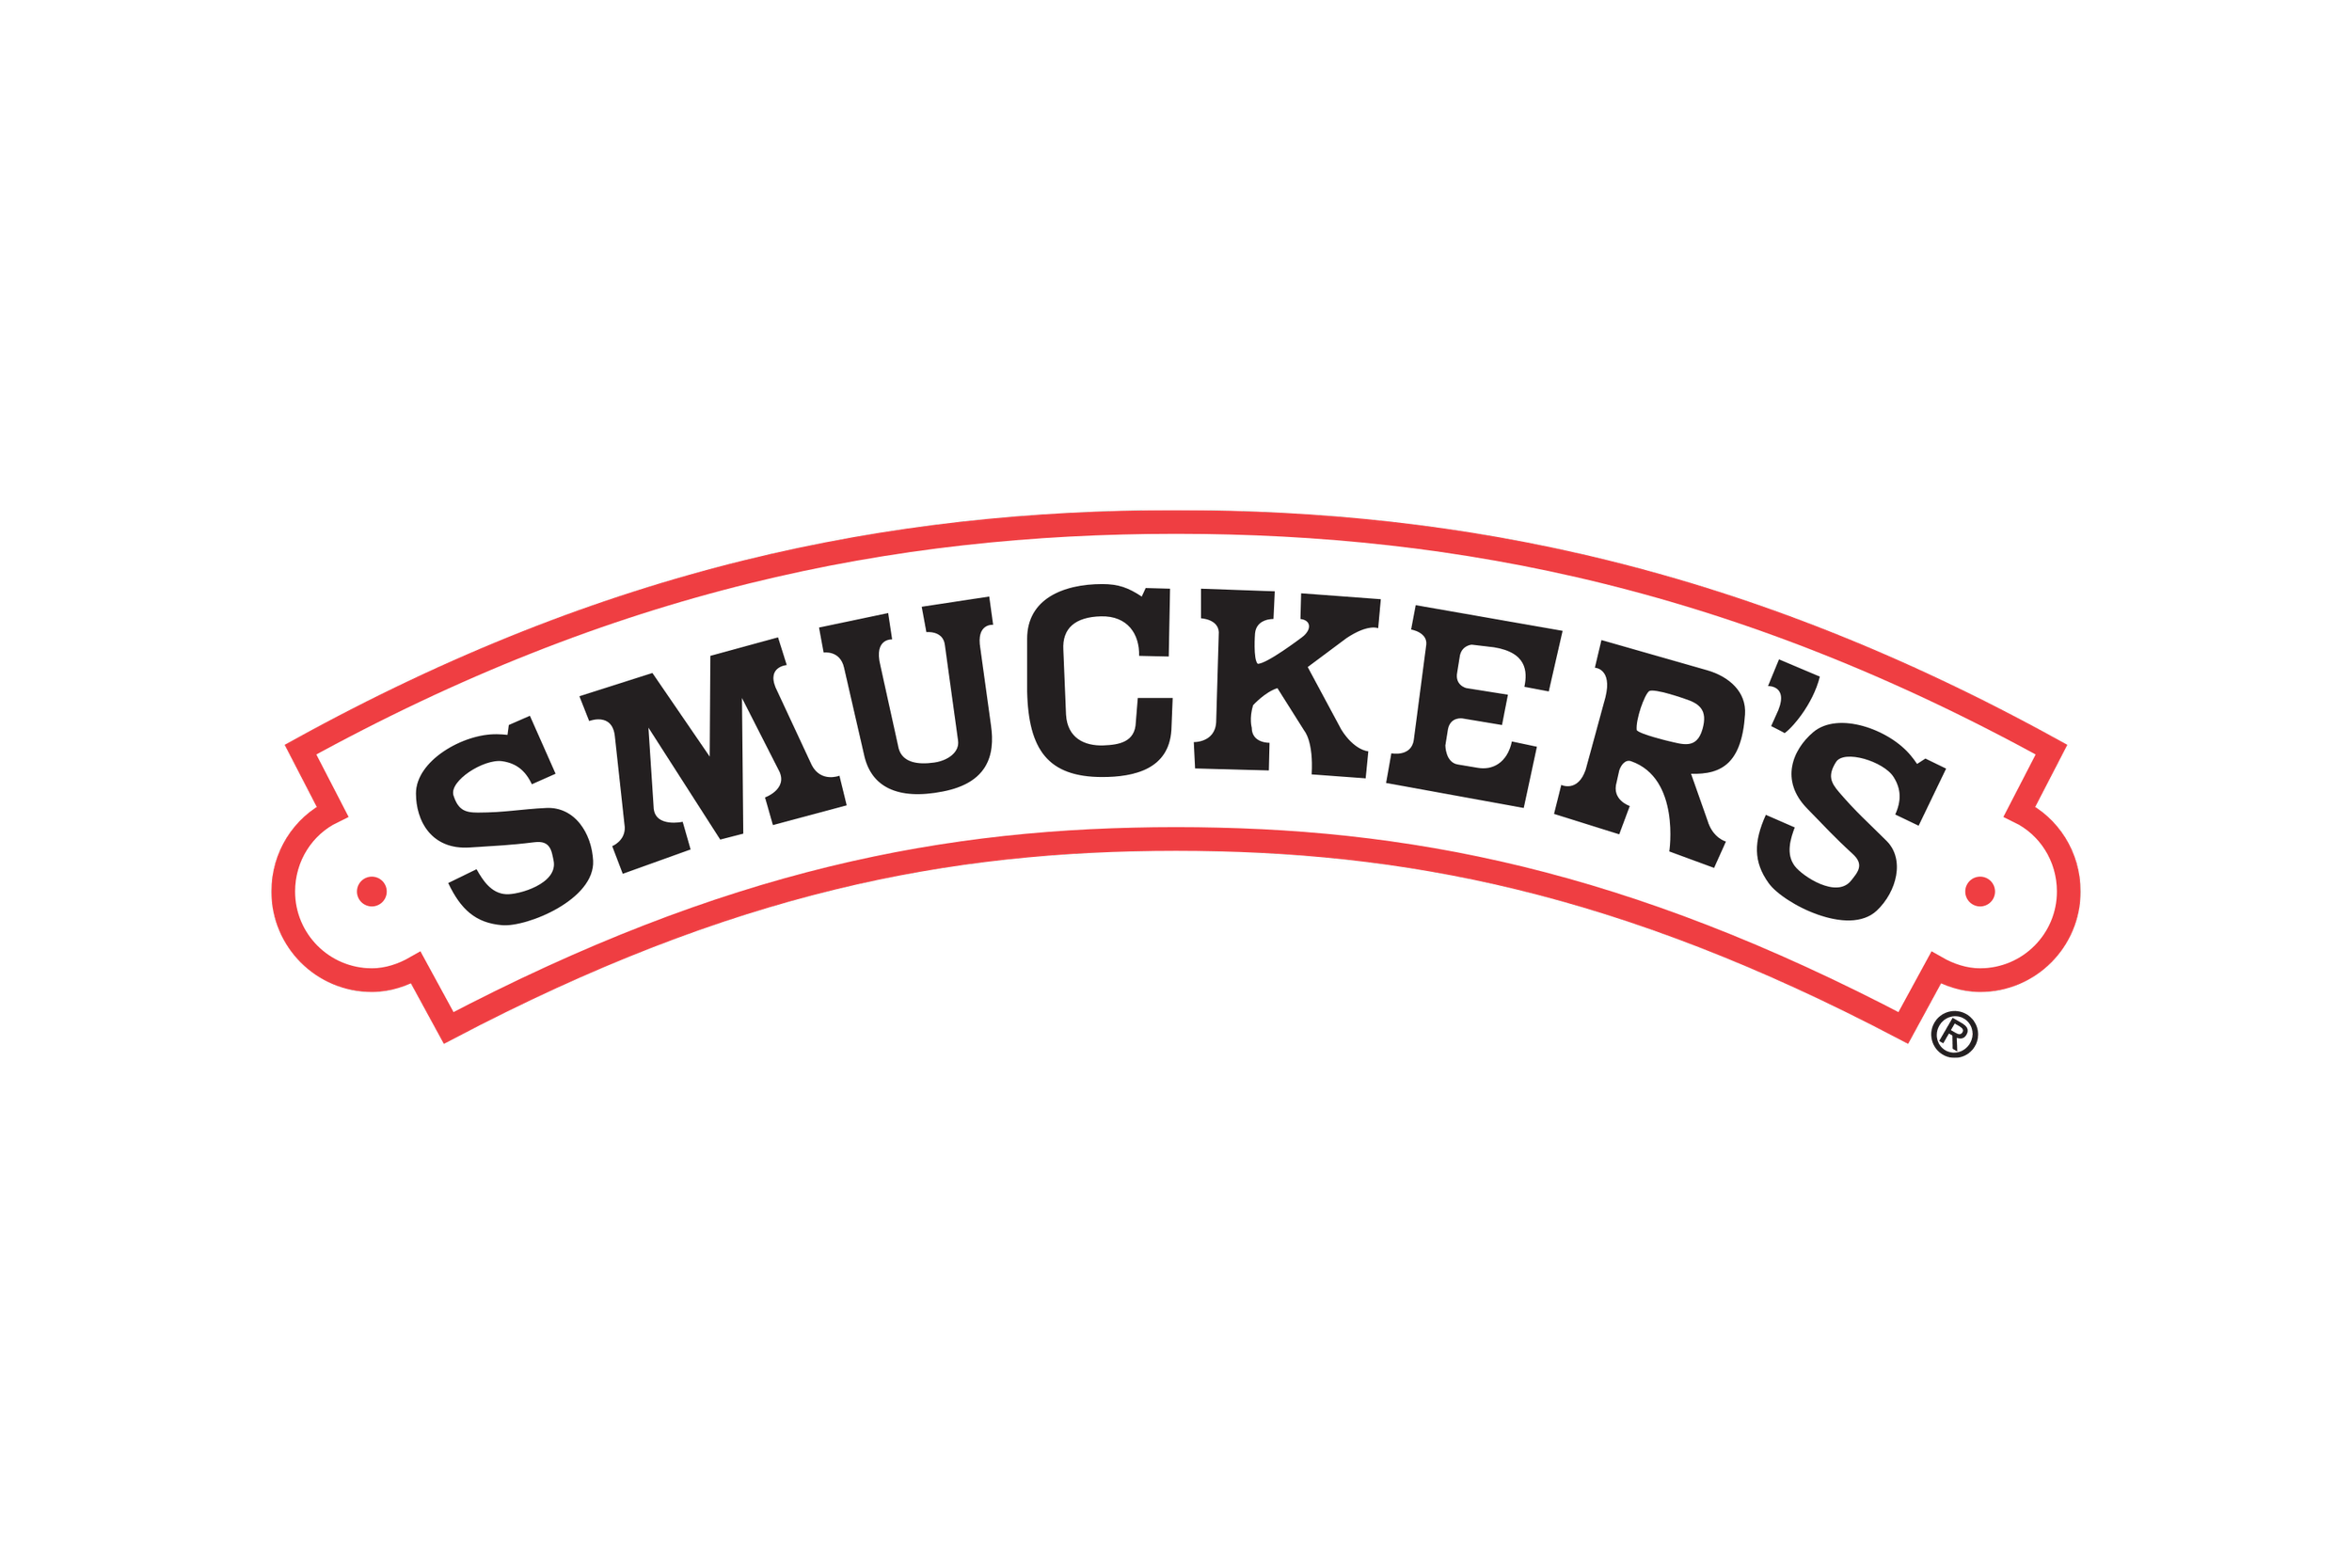 smuckers.png